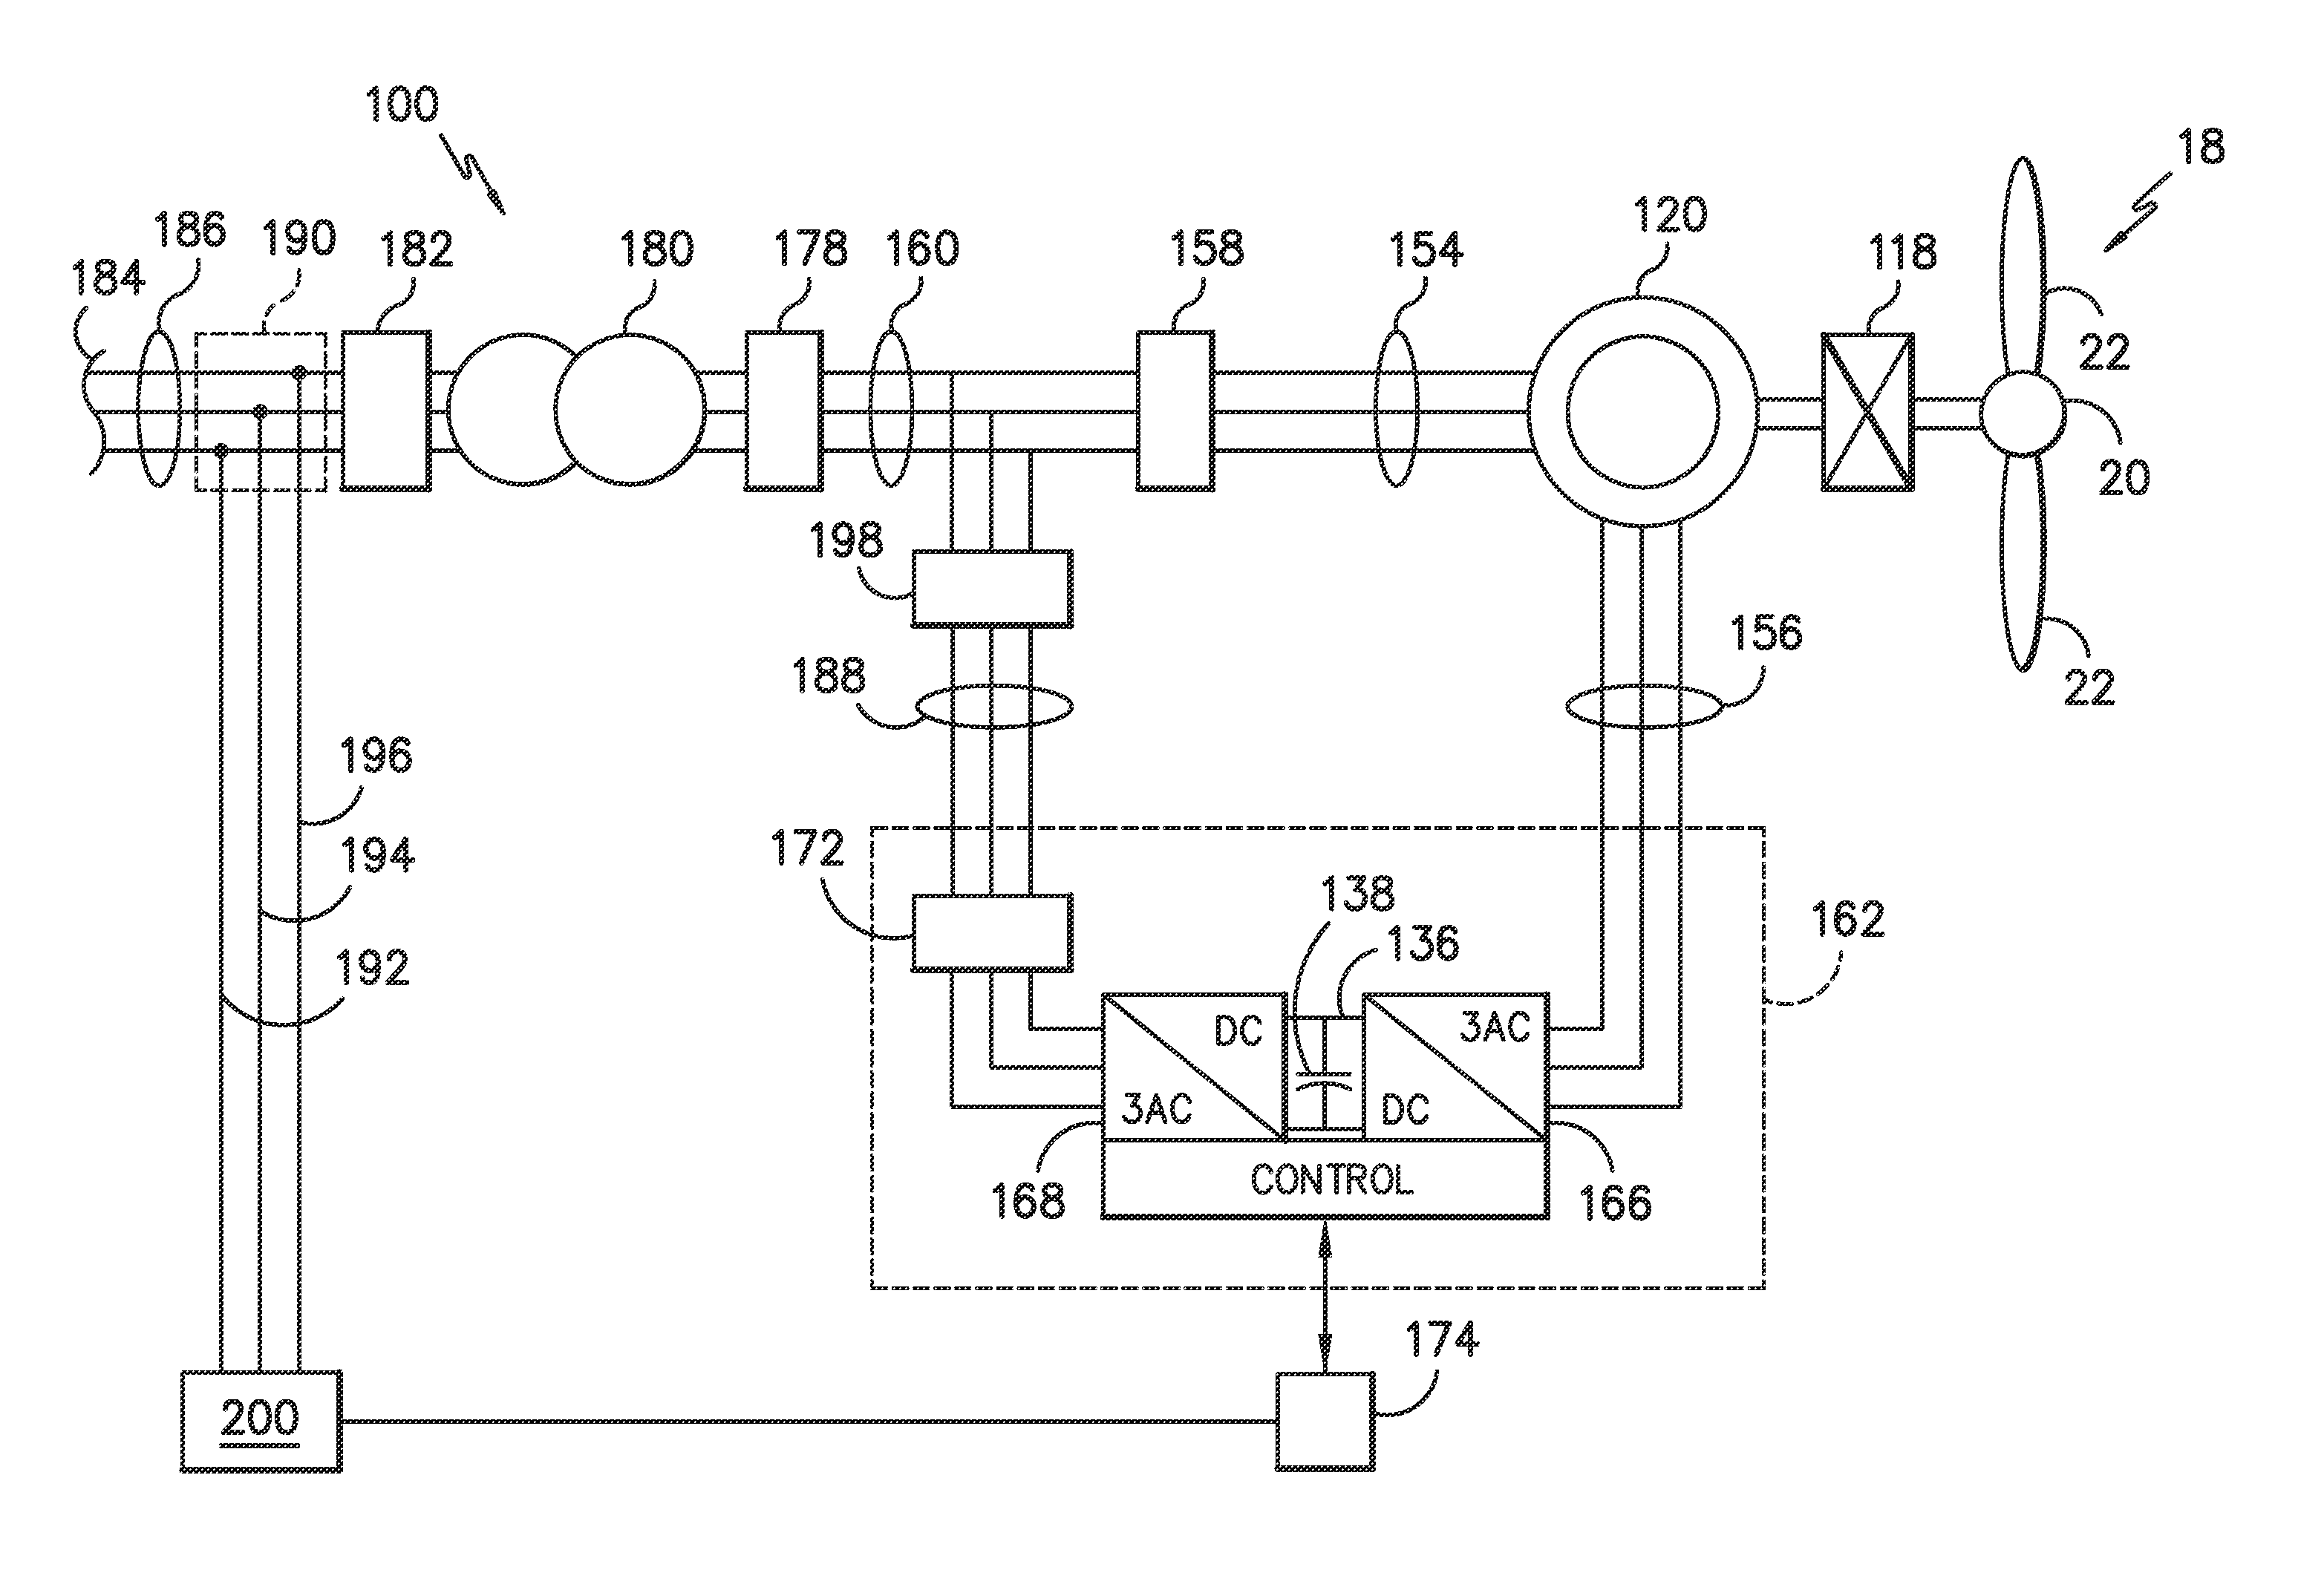 System and method for controlling a power generation system based on a detected islanding event